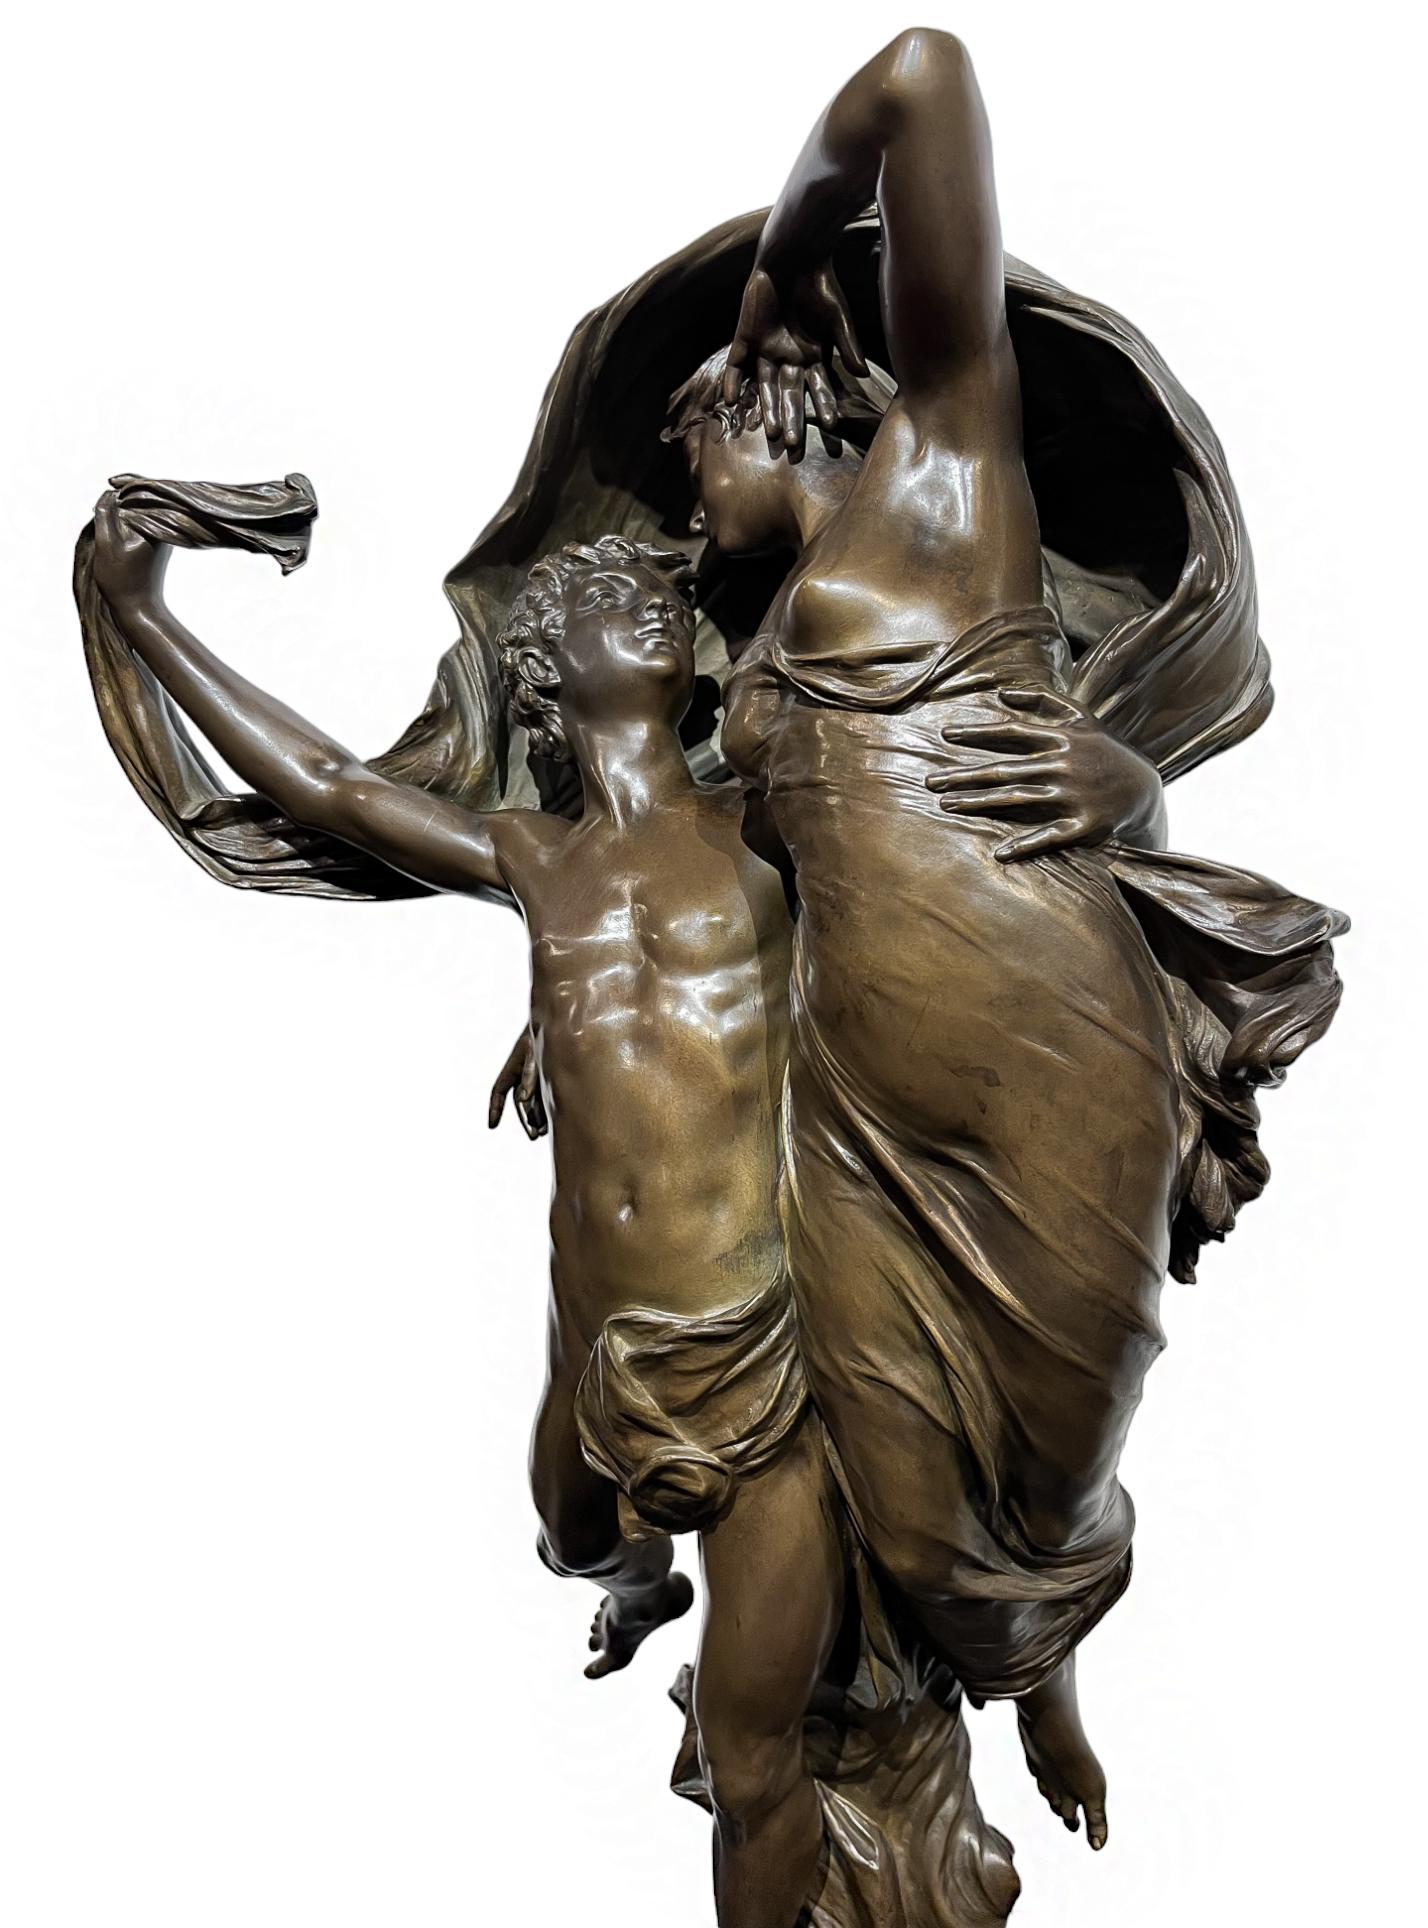 BRONZE FIGURAL GROUP “LA DANSE” BY EUGENE MARIOTON (FRENCH, 1857-1933)

This exceptional work by Eugéne Marioton is a dynamic expression of true love. It is presumed to be an allegorical moment between Zephyr and Psyche, the work is generally titled